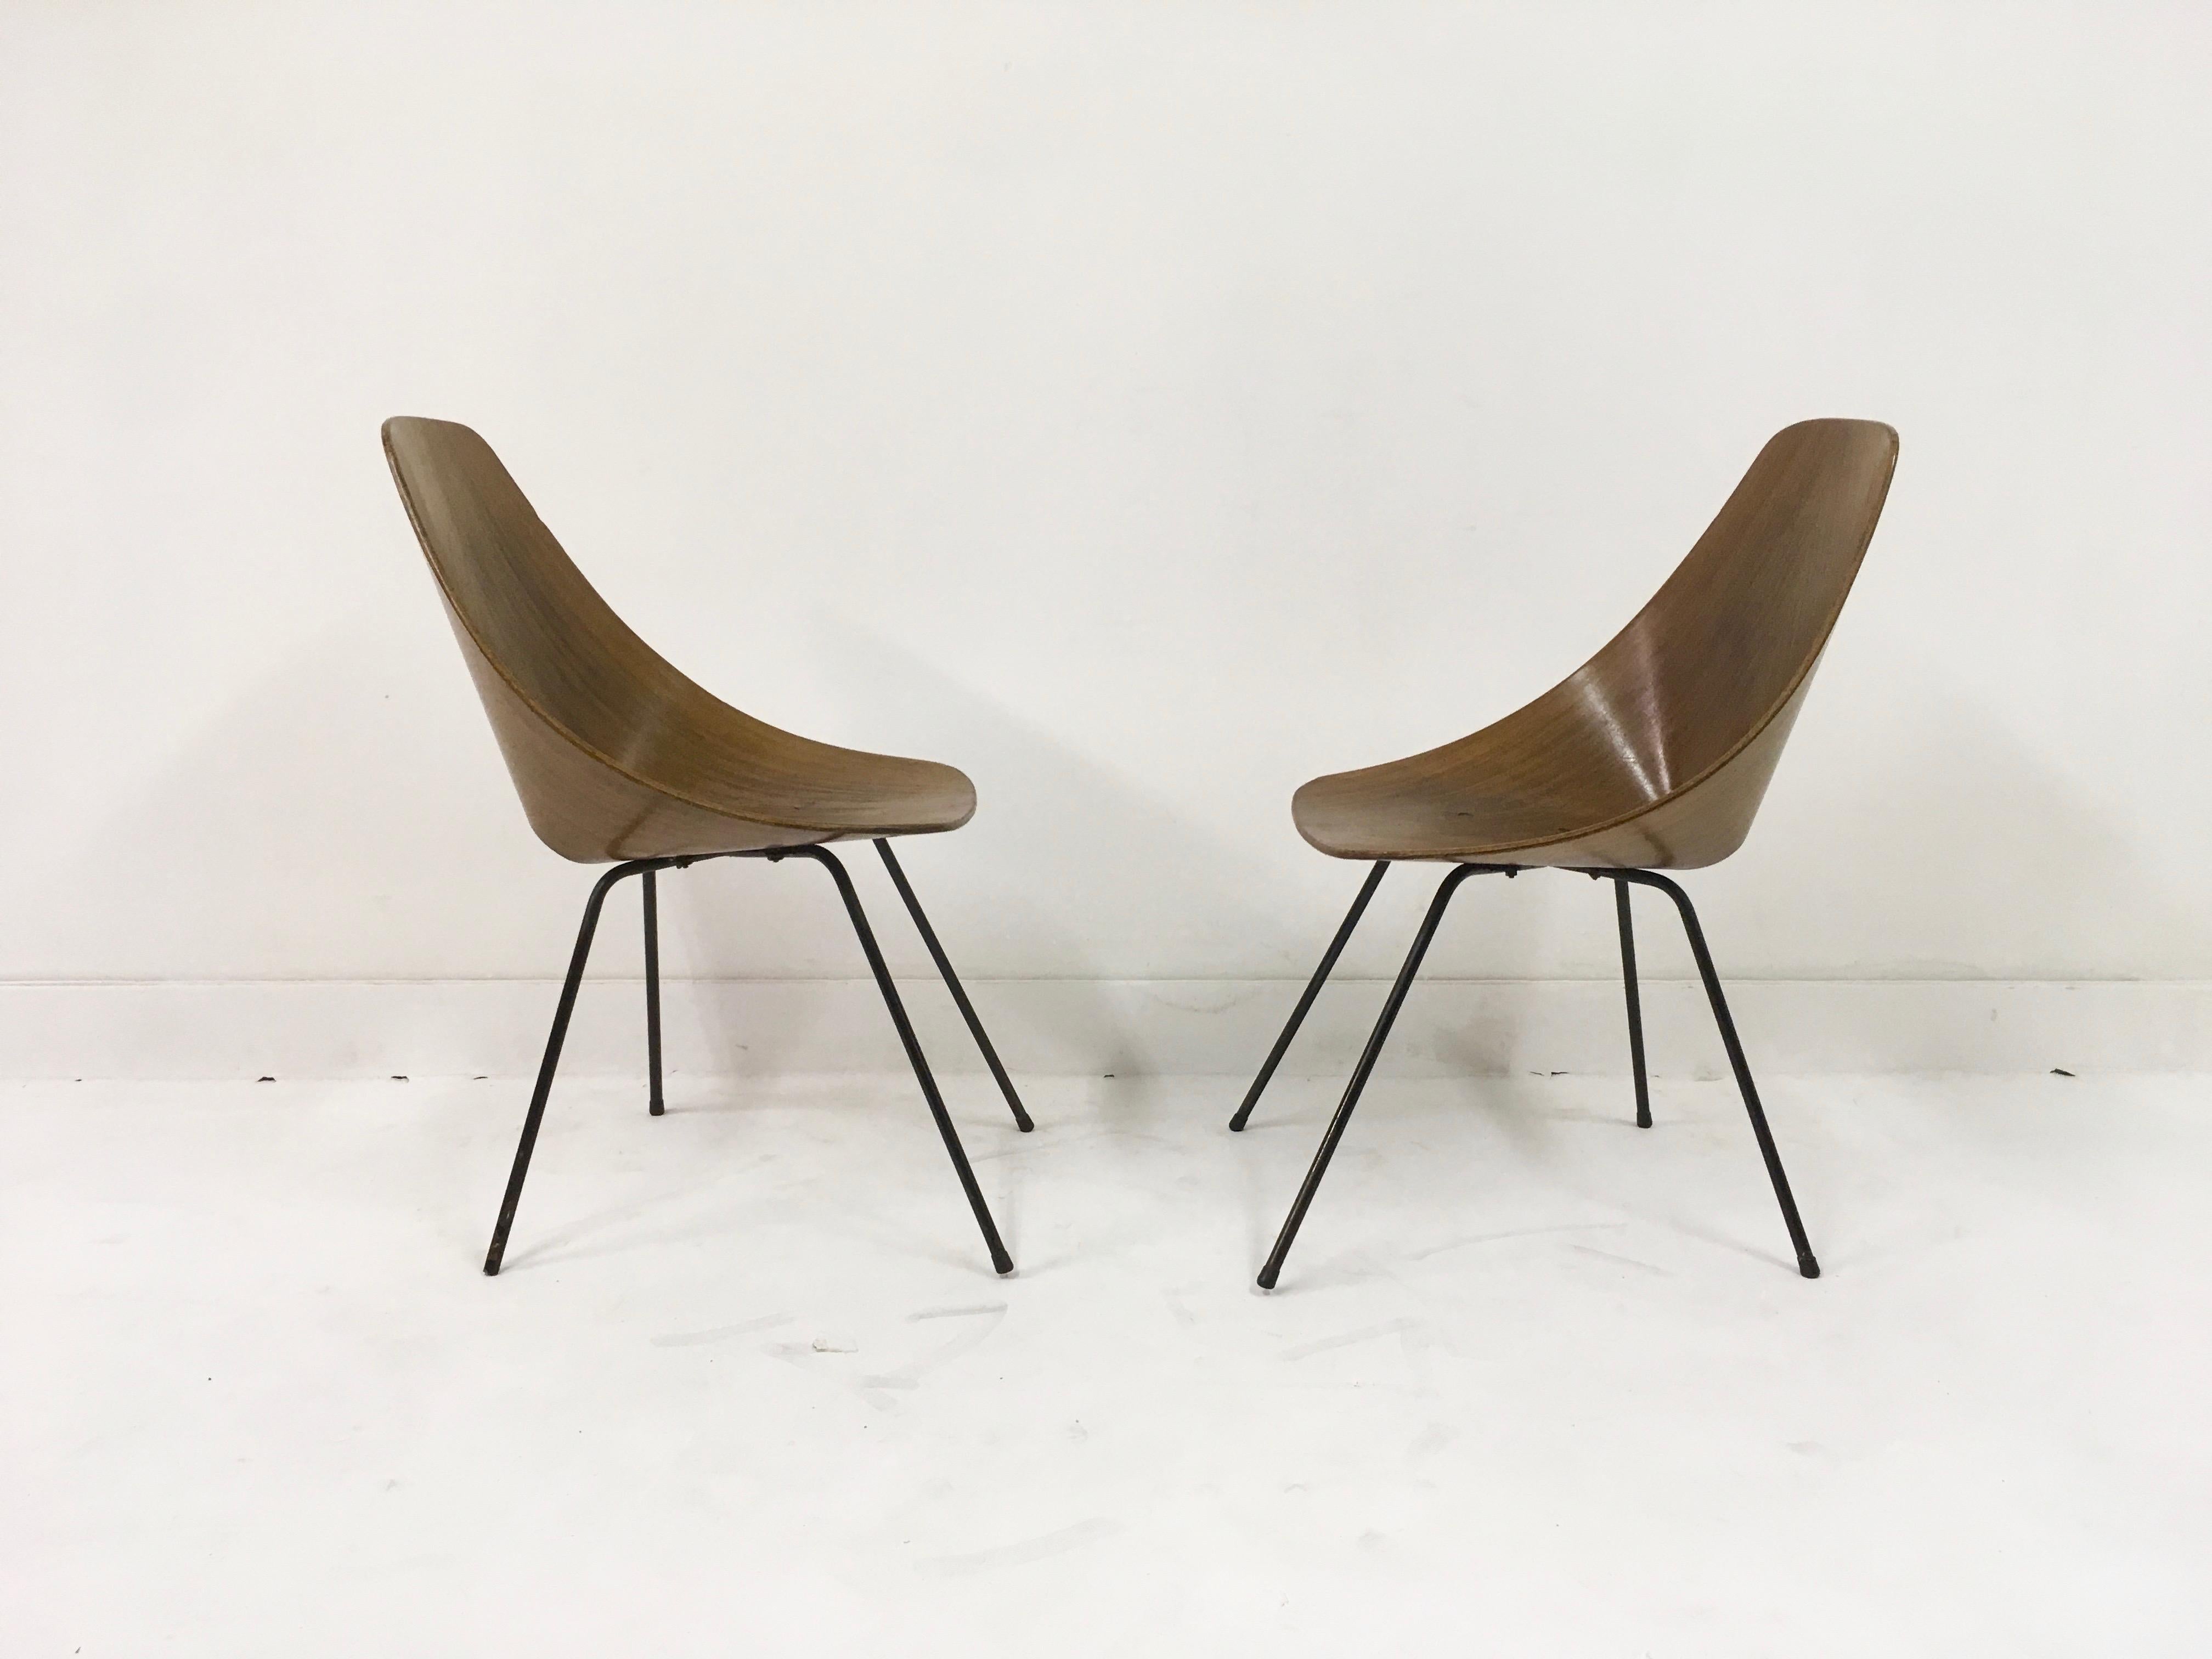 Pair of Midcentury Italian Medea plywood chairs by Nobili, 1950s 1